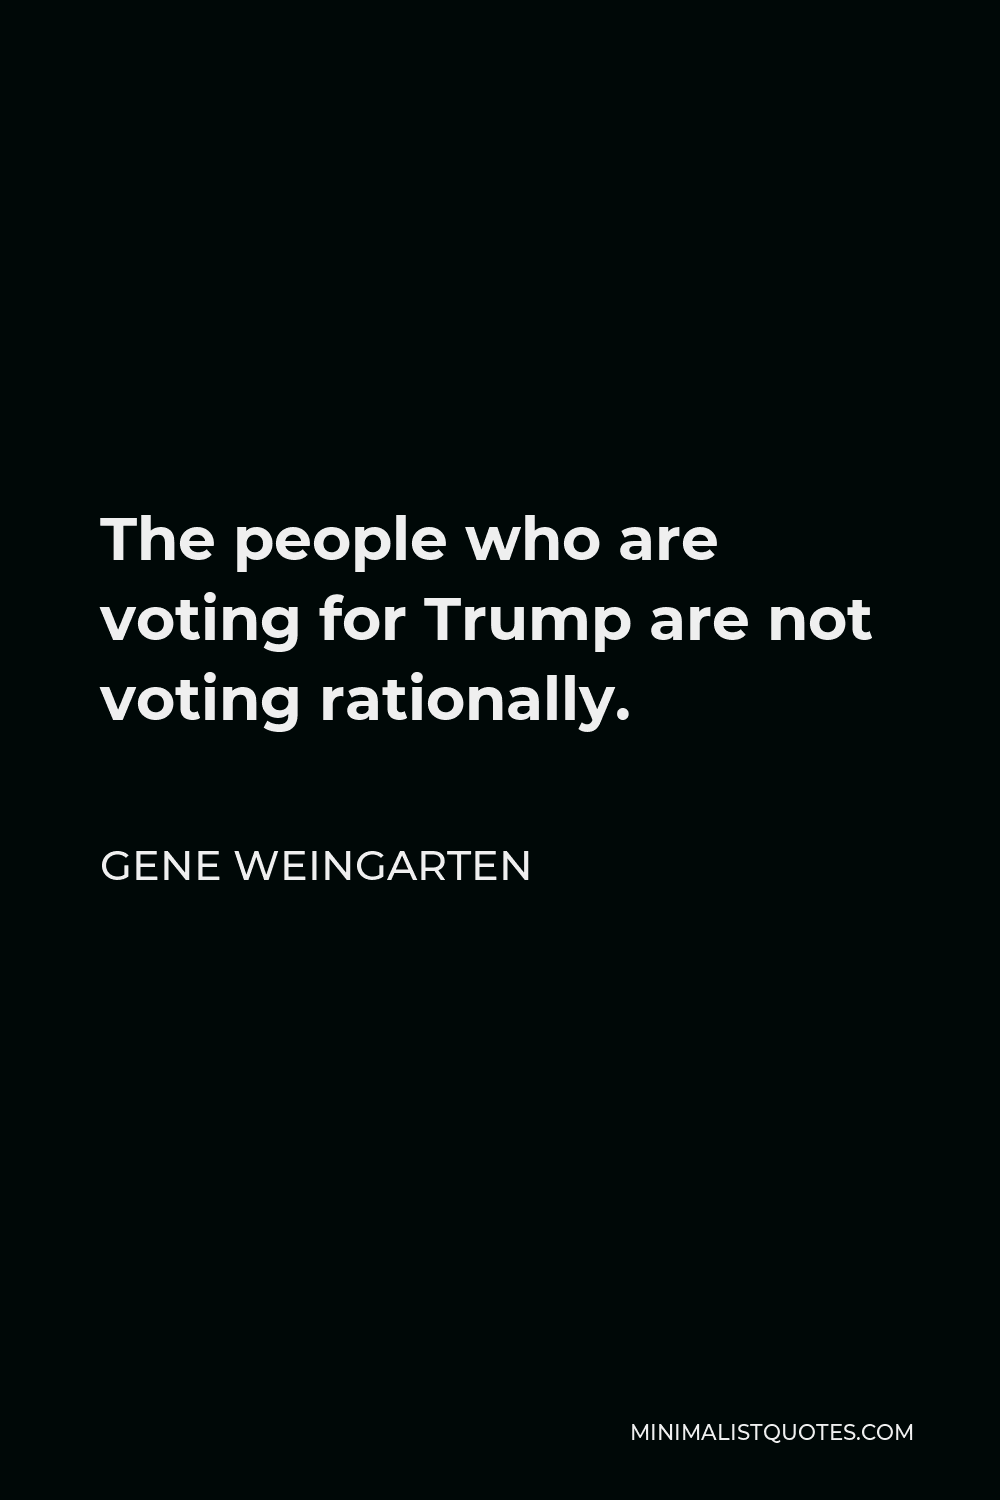 Gene Weingarten Quote - The people who are voting for Trump are not voting rationally.